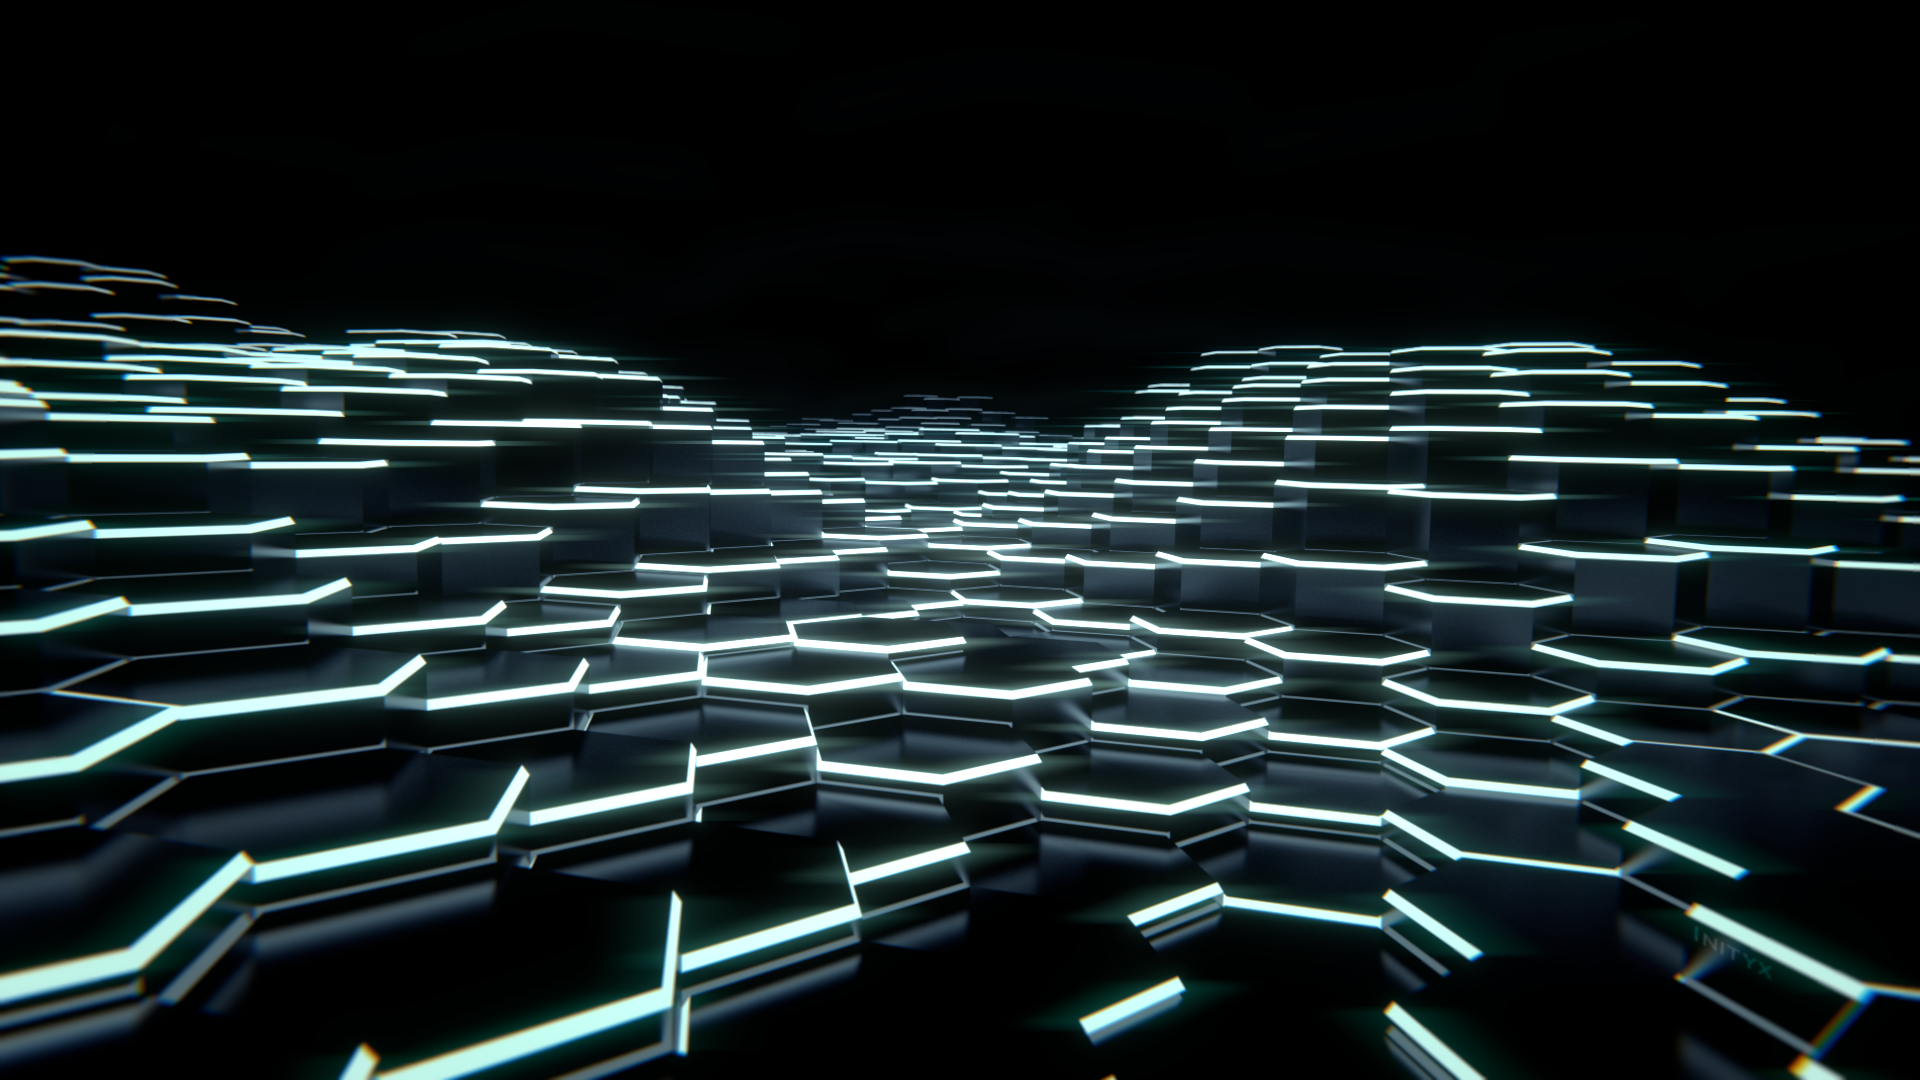 Tron Legacy style wallpaper by Inityx on DeviantArt